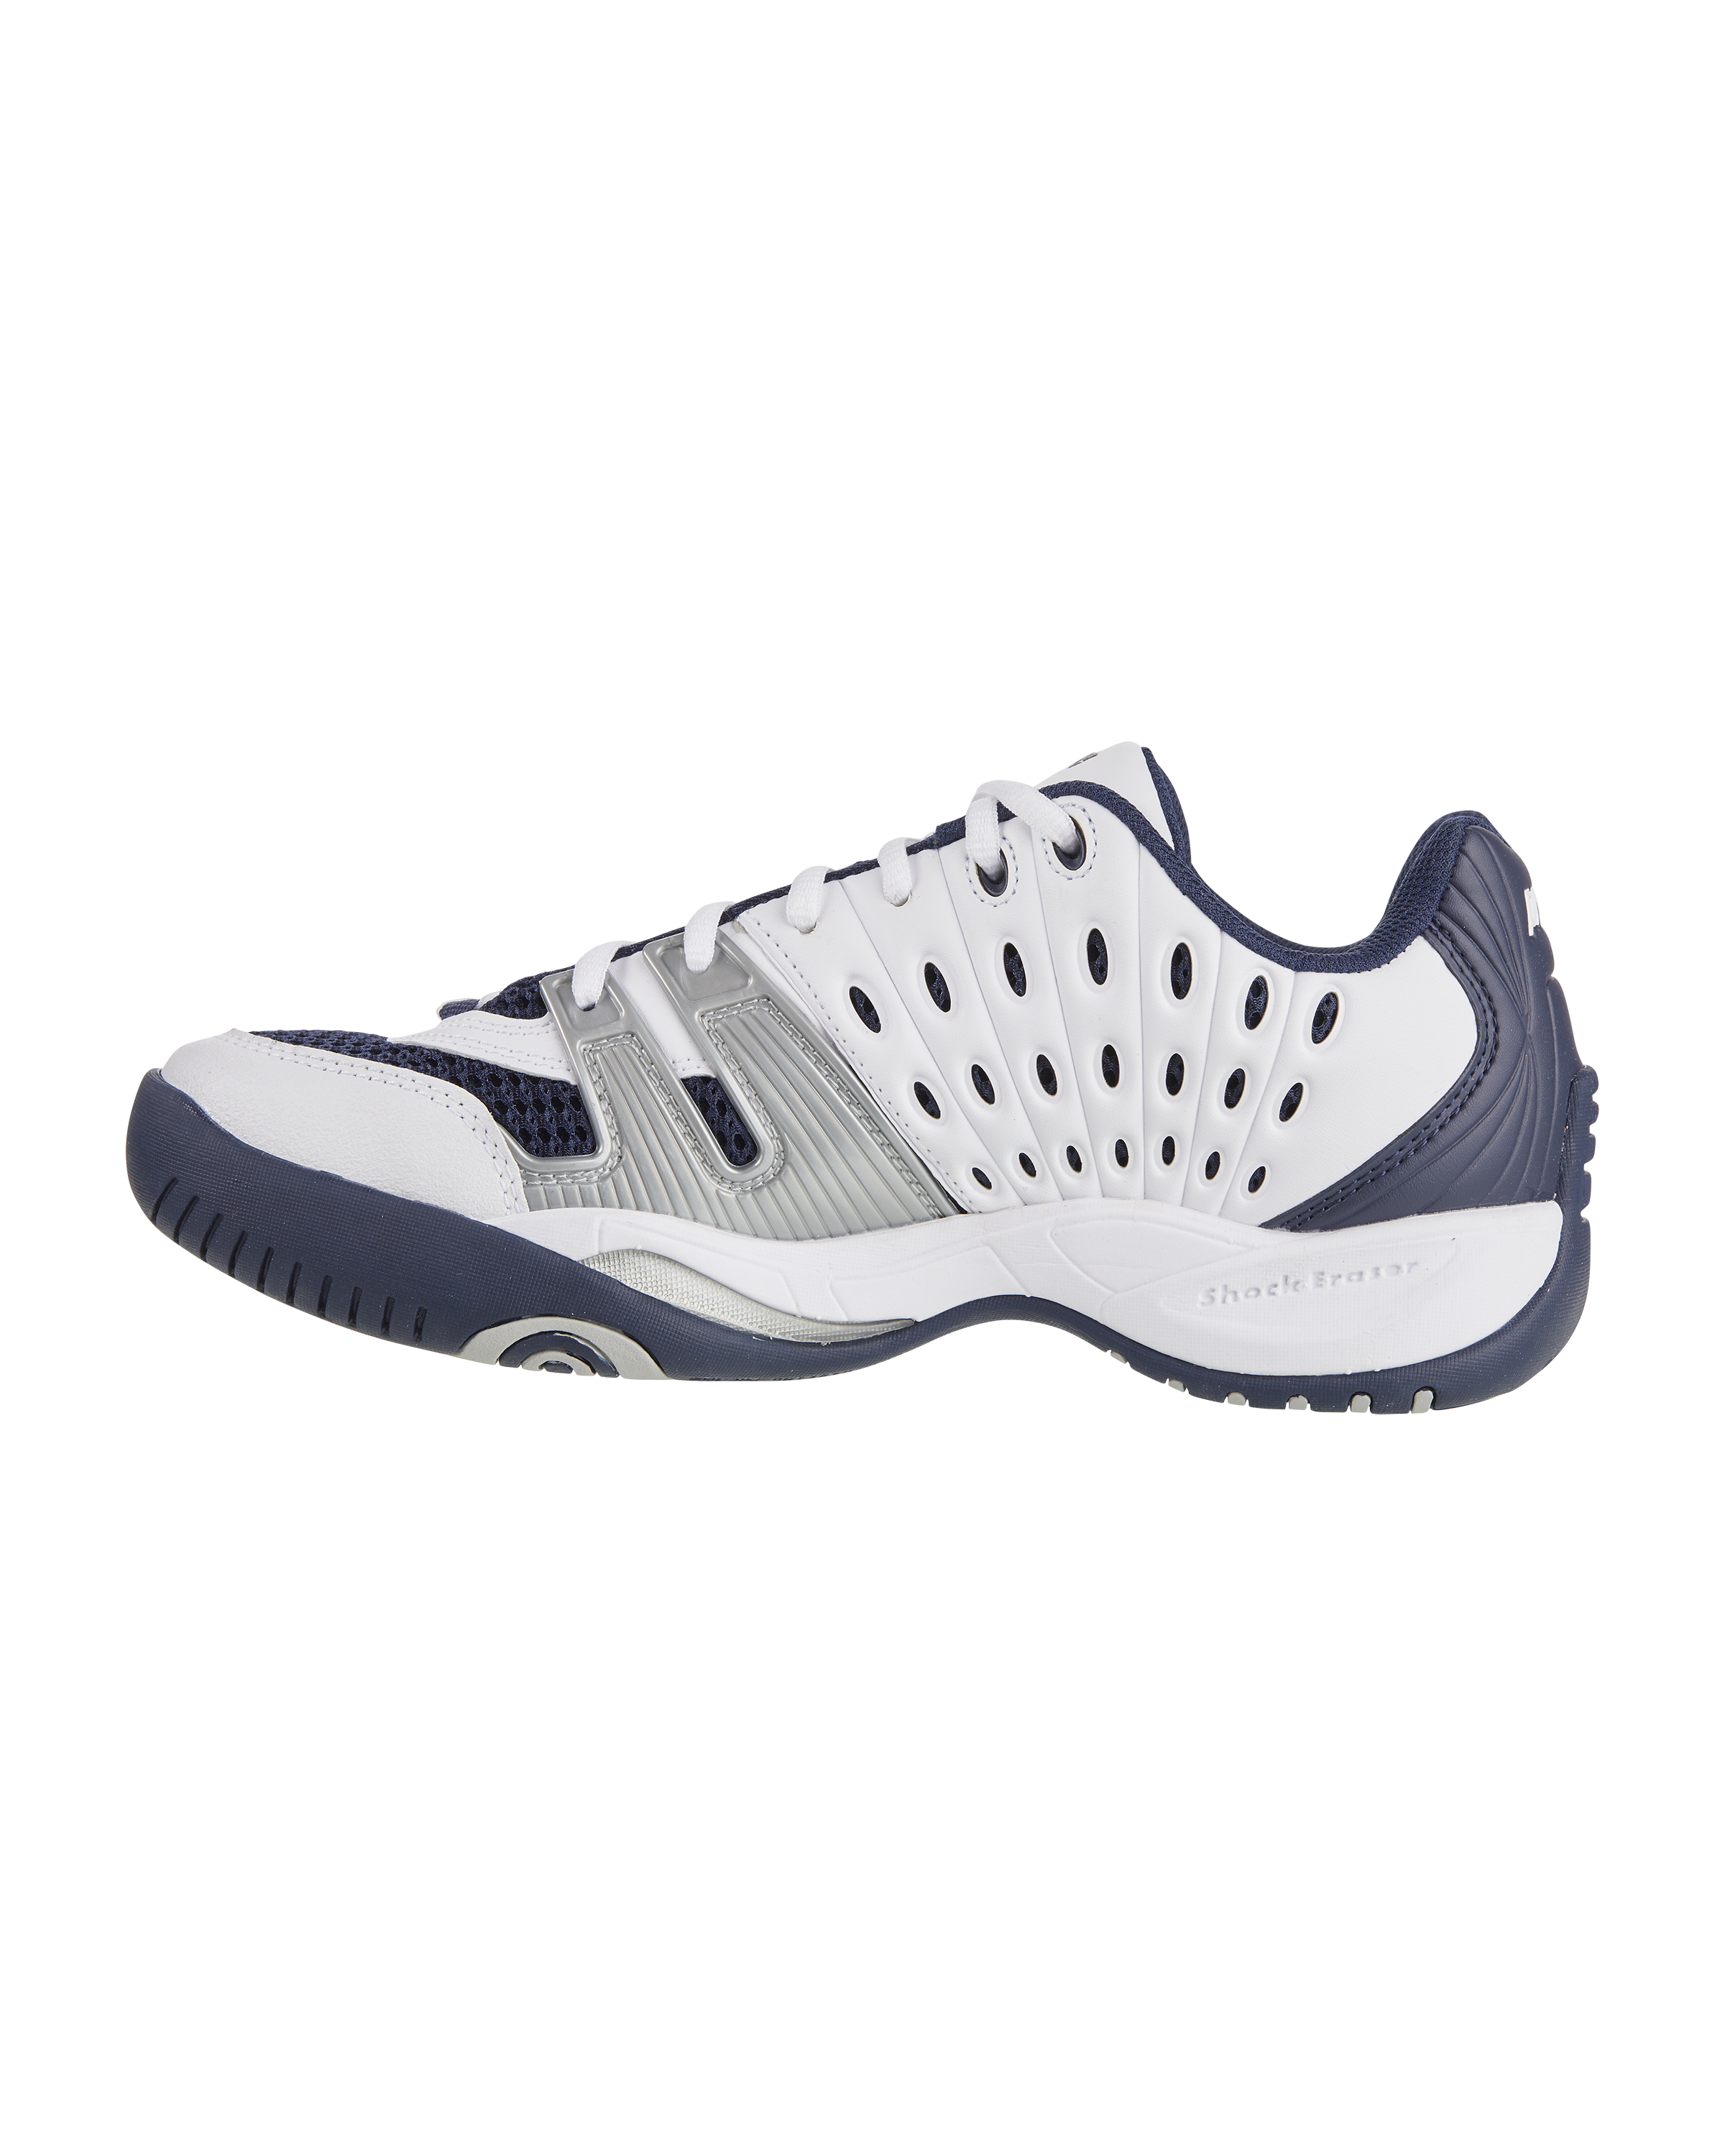 8P984853_T-22M_WHITE-NAVY-SILVER_MEDIAL.png